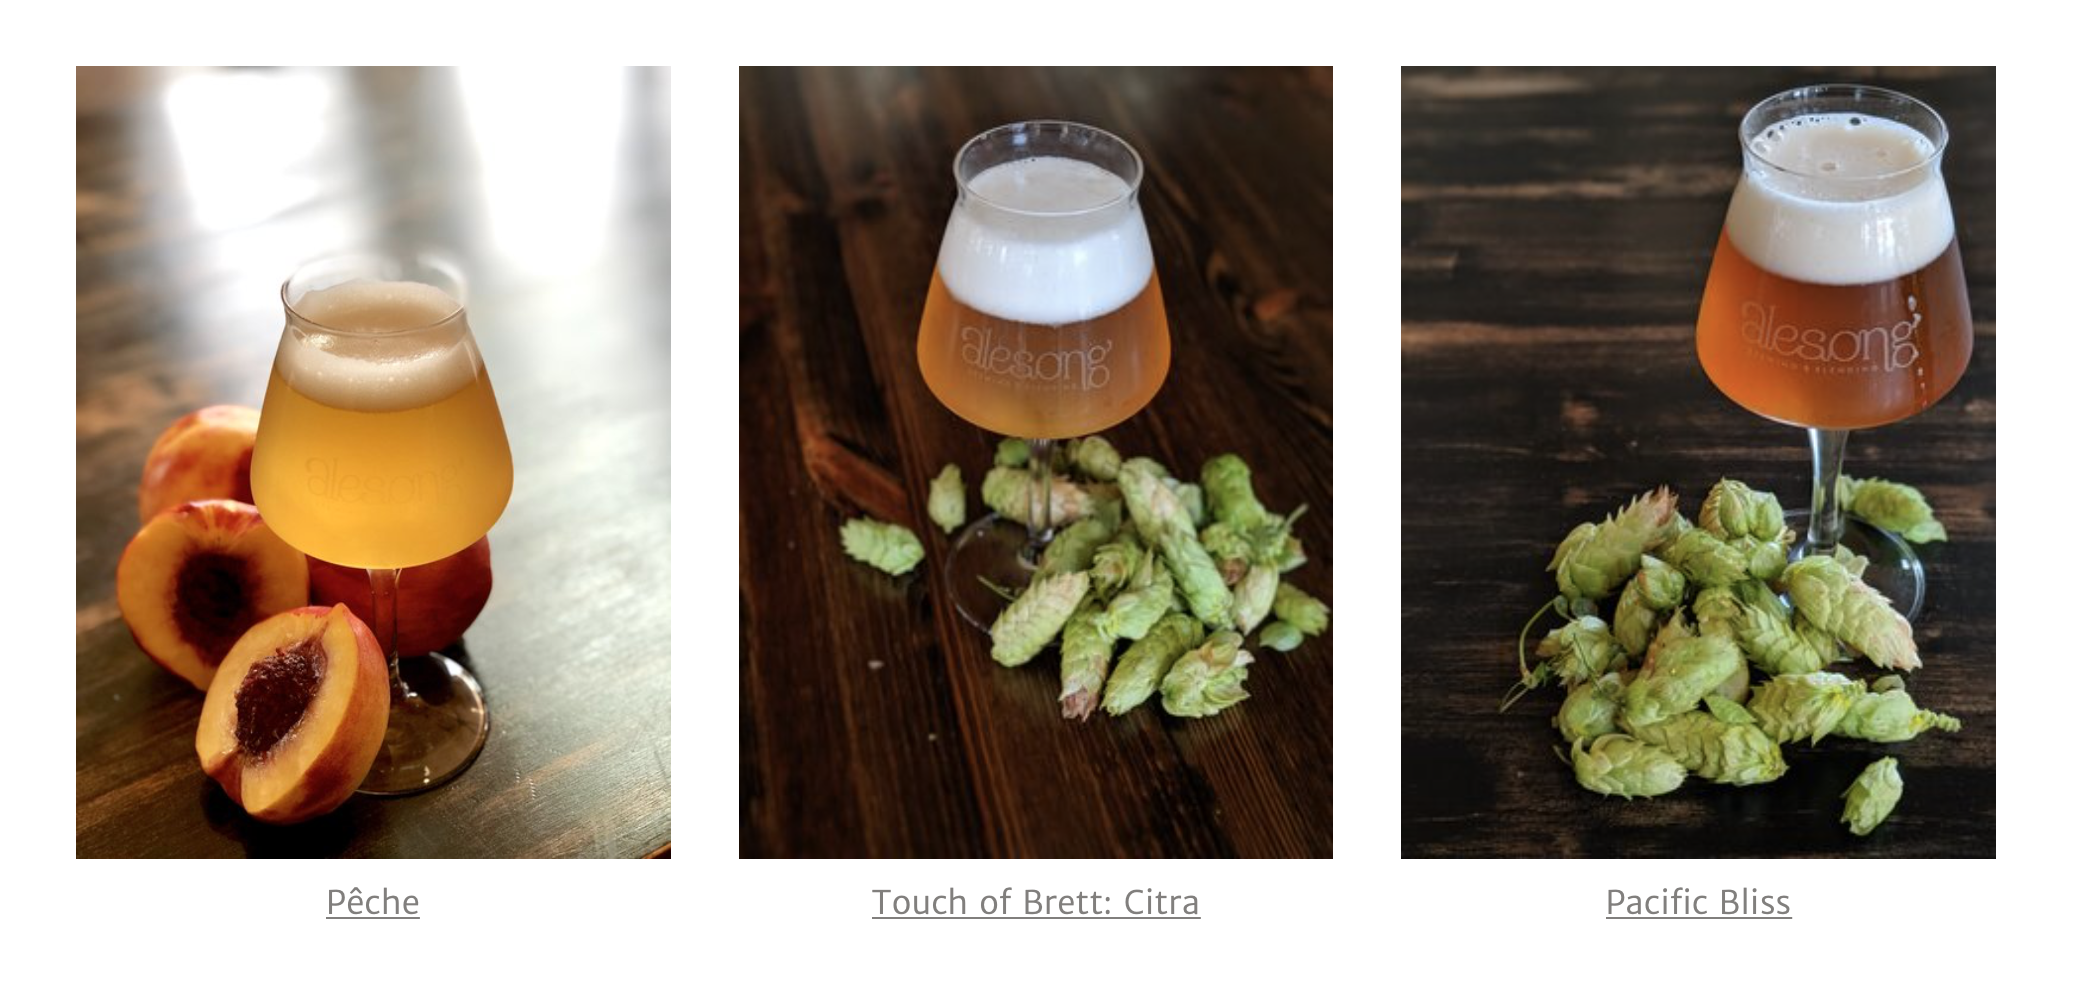 image of Pêche, Touch Of Brett: Citra, and Pacific Bliss (Club Only Release) courtesy of Alesong Brewing & Blending